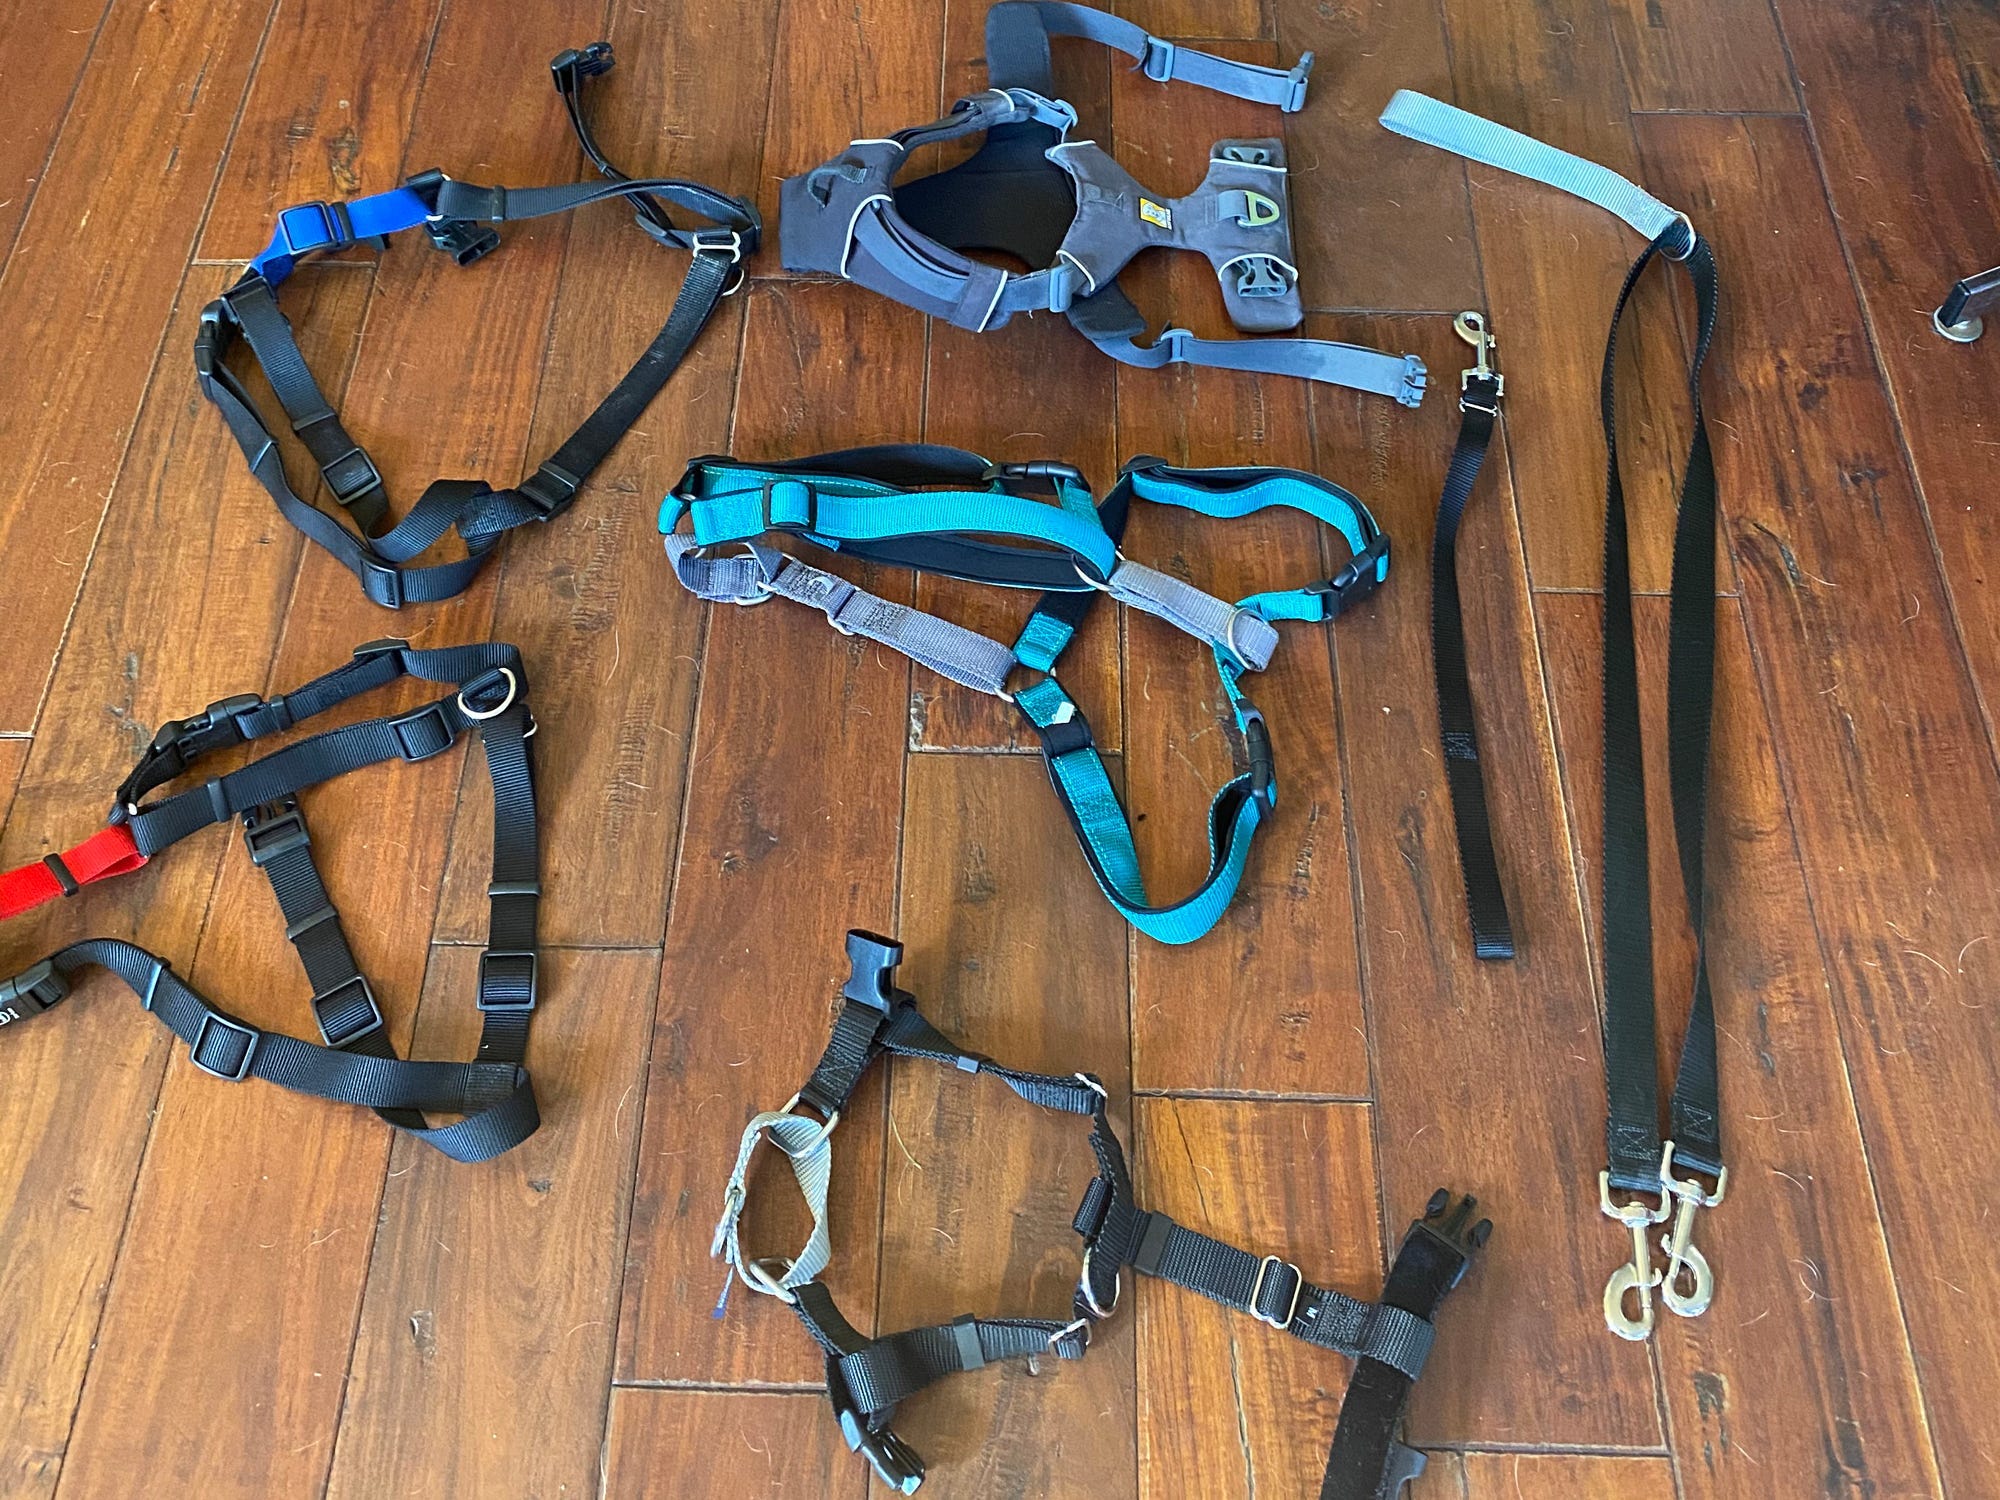 <p>We considered the most popular harnesses on the market and solicited opinions from professional dog walkers and dog trainers who were already using the brands under consideration.</p><p>Three shelter staff and two volunteer shelter walkers then tested the harnesses on walks with more than two dozen rescue dogs at Family Dog Rescue in San Francisco over a period of eight weeks. The dogs were all medium and large-size (over 50 pounds) and chosen because they were known to be difficult to walk due to overexcitability, lack of training, or reactivity. Dogs were walked with the tester harnesses for 30 to 60 minutes on city streets and in local parks.</p><p>Unmanageable leash pulling is typically a problem for dog owners with larger dogs, so we did not test these harnesses on dogs under 25 pounds. Many small dogs strain while on leash, but owners do not struggle with being pulled off their feet.</p><p>We also did not test head halters, as most dogs initially find them uncomfortable and will resist wearing them. The no-pull harnesses in this guide are a better choice for anyone looking for the least intrusive, minimally aversive <a href="https://m.iaabc.org/about/lima/#:~:text=%E2%80%9CLIMA%E2%80%9D%20is%20an%20acronym%20for,training%20or%20behavior%20change%20objective." rel="noopener">(LIMA)</a> approach to dog training and behavior modification. If you'd like to learn more about head halters, read about them in our guide to the <a href="https://www.insider.com/guides/pets/best-dog-harness" rel="noopener">best dog harnesses</a>.</p><p> We rated each harness according to the following criteria:</p><ul><li><strong>Prevents pulling:</strong> We assessed how well it prevented dogs from pulling on leash while walking. Dogs were walked for a minimum of 30 minutes on 4-foot leashes.</li><li><strong>Does not impede or restrict movement:</strong> Harnesses were tested on dogs of different sizes and shapes to check for sagging and straps that lay over the dog's front legs and shoulders.</li><li><strong>Does not chafe or rub</strong>: We tested harnesses on both long- and short-haired dogs to check for chafing or rubbing.</li><li><strong>Dog cannot slip or back out of the harness</strong>: Because these harnesses were tested on shelter dogs who tend to be flight risks, this was a crucial consideration.</li><li><strong>Easy to put on and take off/ease of adjusting</strong>: Putting on or adjusting your dog's harness shouldn't be frustrating. Our shelter volunteers and testers were asked to record their impressions when first putting the tester harnesses on dogs.</li><li><strong>Durability and washability:</strong> We asked professional dog walkers for their opinions on how well these wear over time and whether they hold up after multiple washes.</li><li><strong>Initial cost and replacement cost</strong>: We considered whether the price of the harness is justified and how easy it is to replace if chewed.</li></ul>